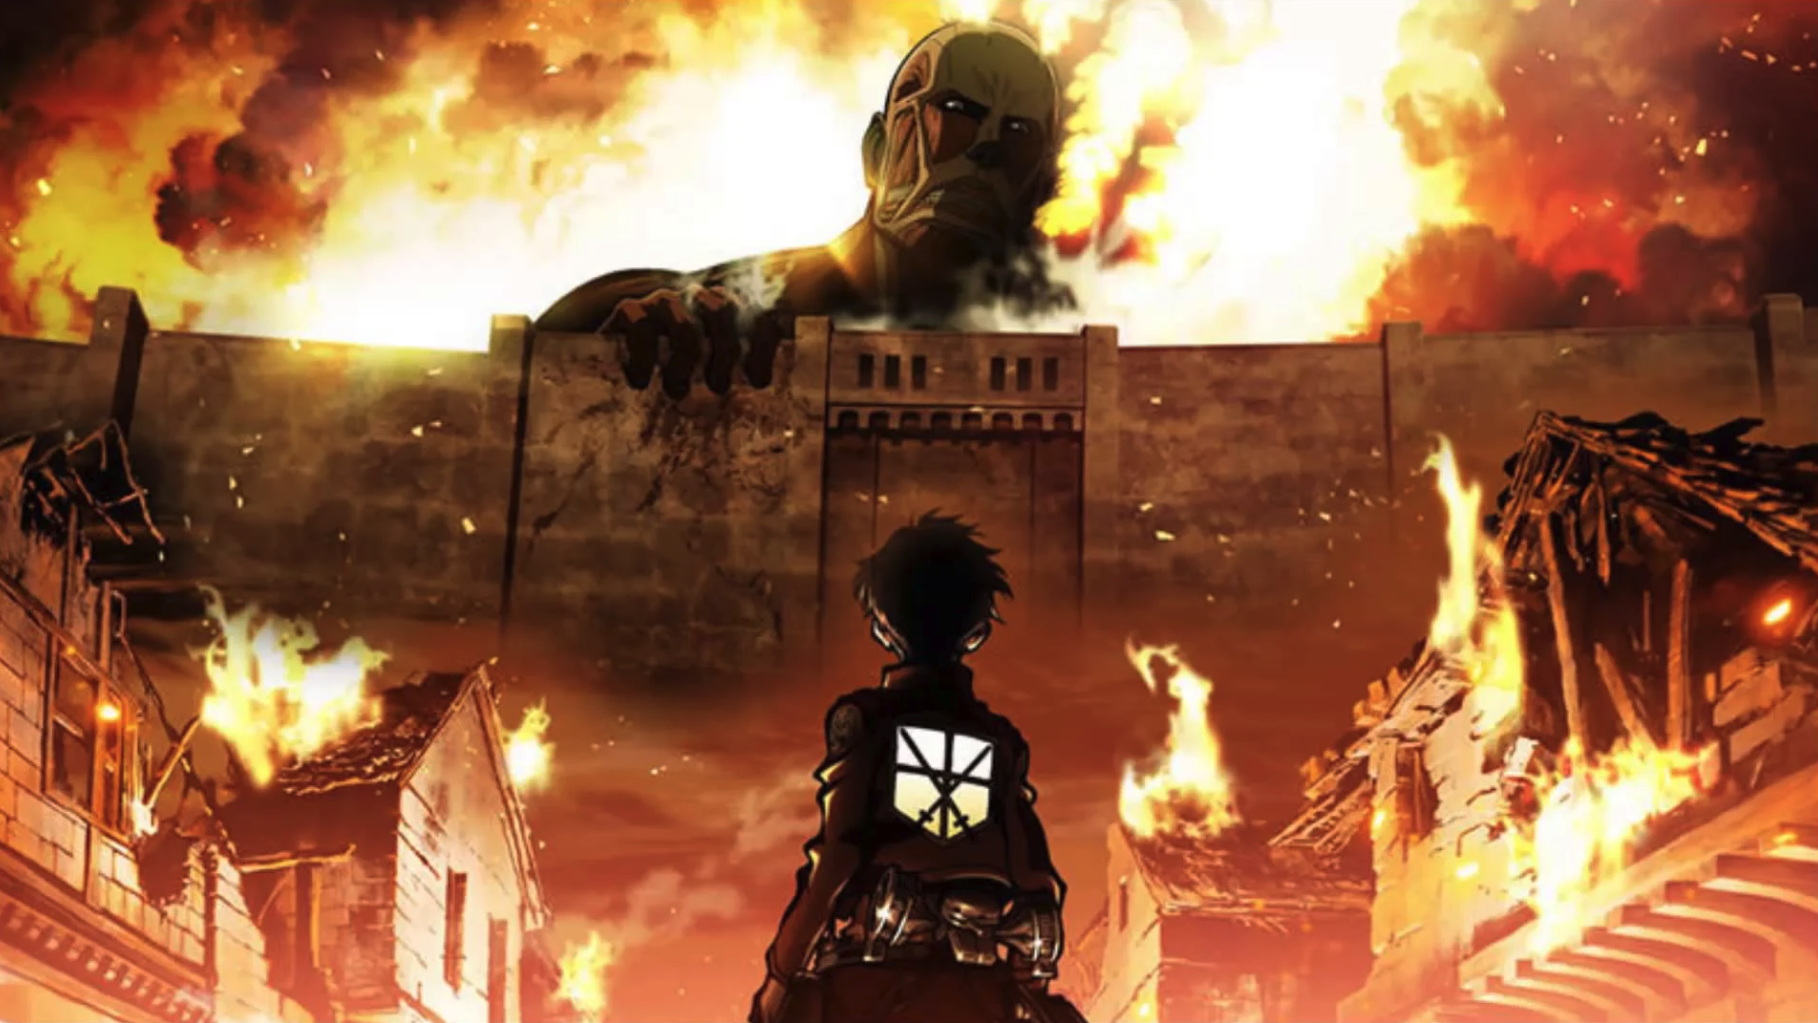 Eren from Attack on Titan looking at a titan above a wall surrounding his town